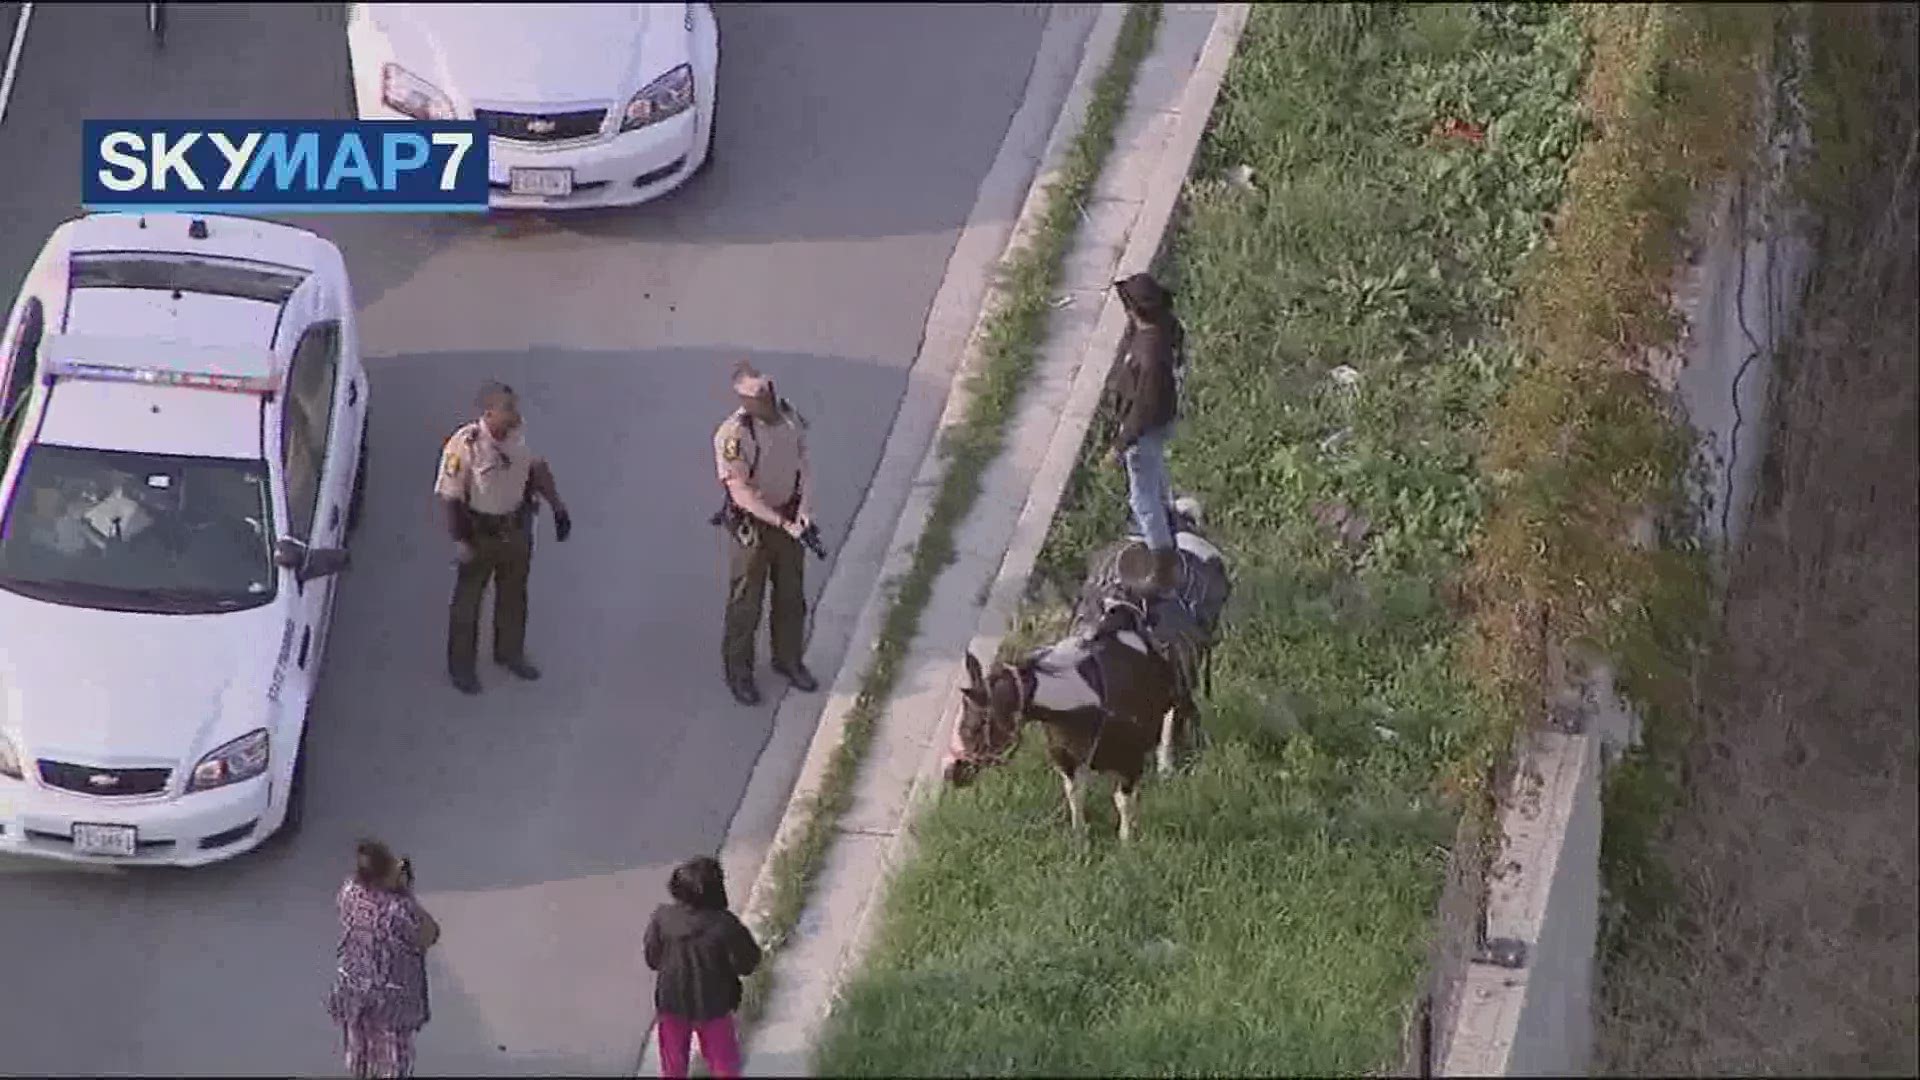 He was riding his horse down a Chicago freeway.